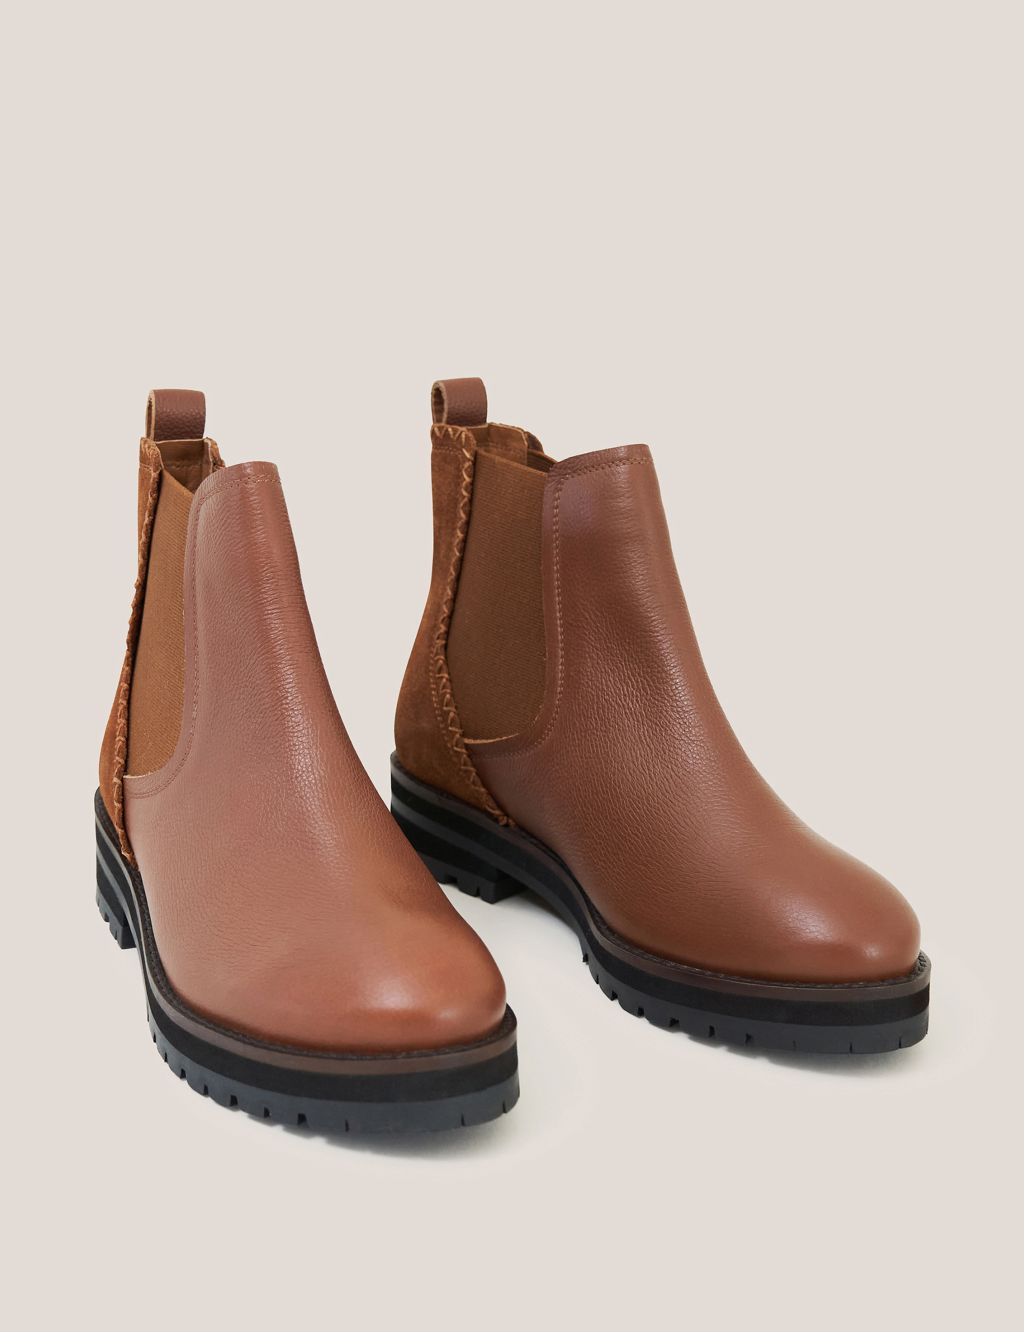 Leather Chelsea Ankle Boots image 2